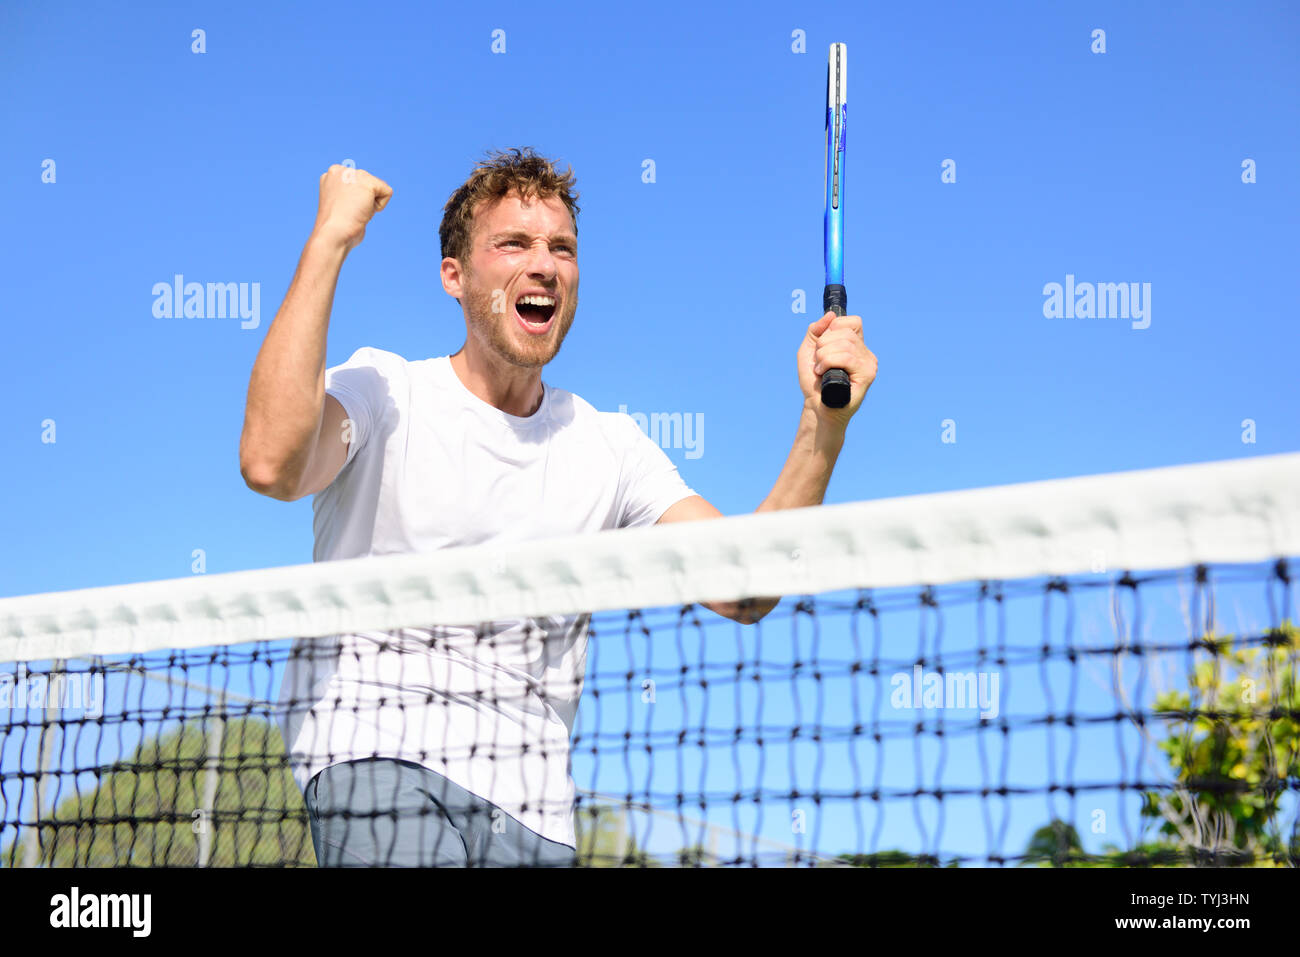 Tennis player celebrating victory. Winning cheering man happy in celebration of success and win. Fit male athlete winner on tennis court outdoors holding tennis racket in triumph by the net. Stock Photo